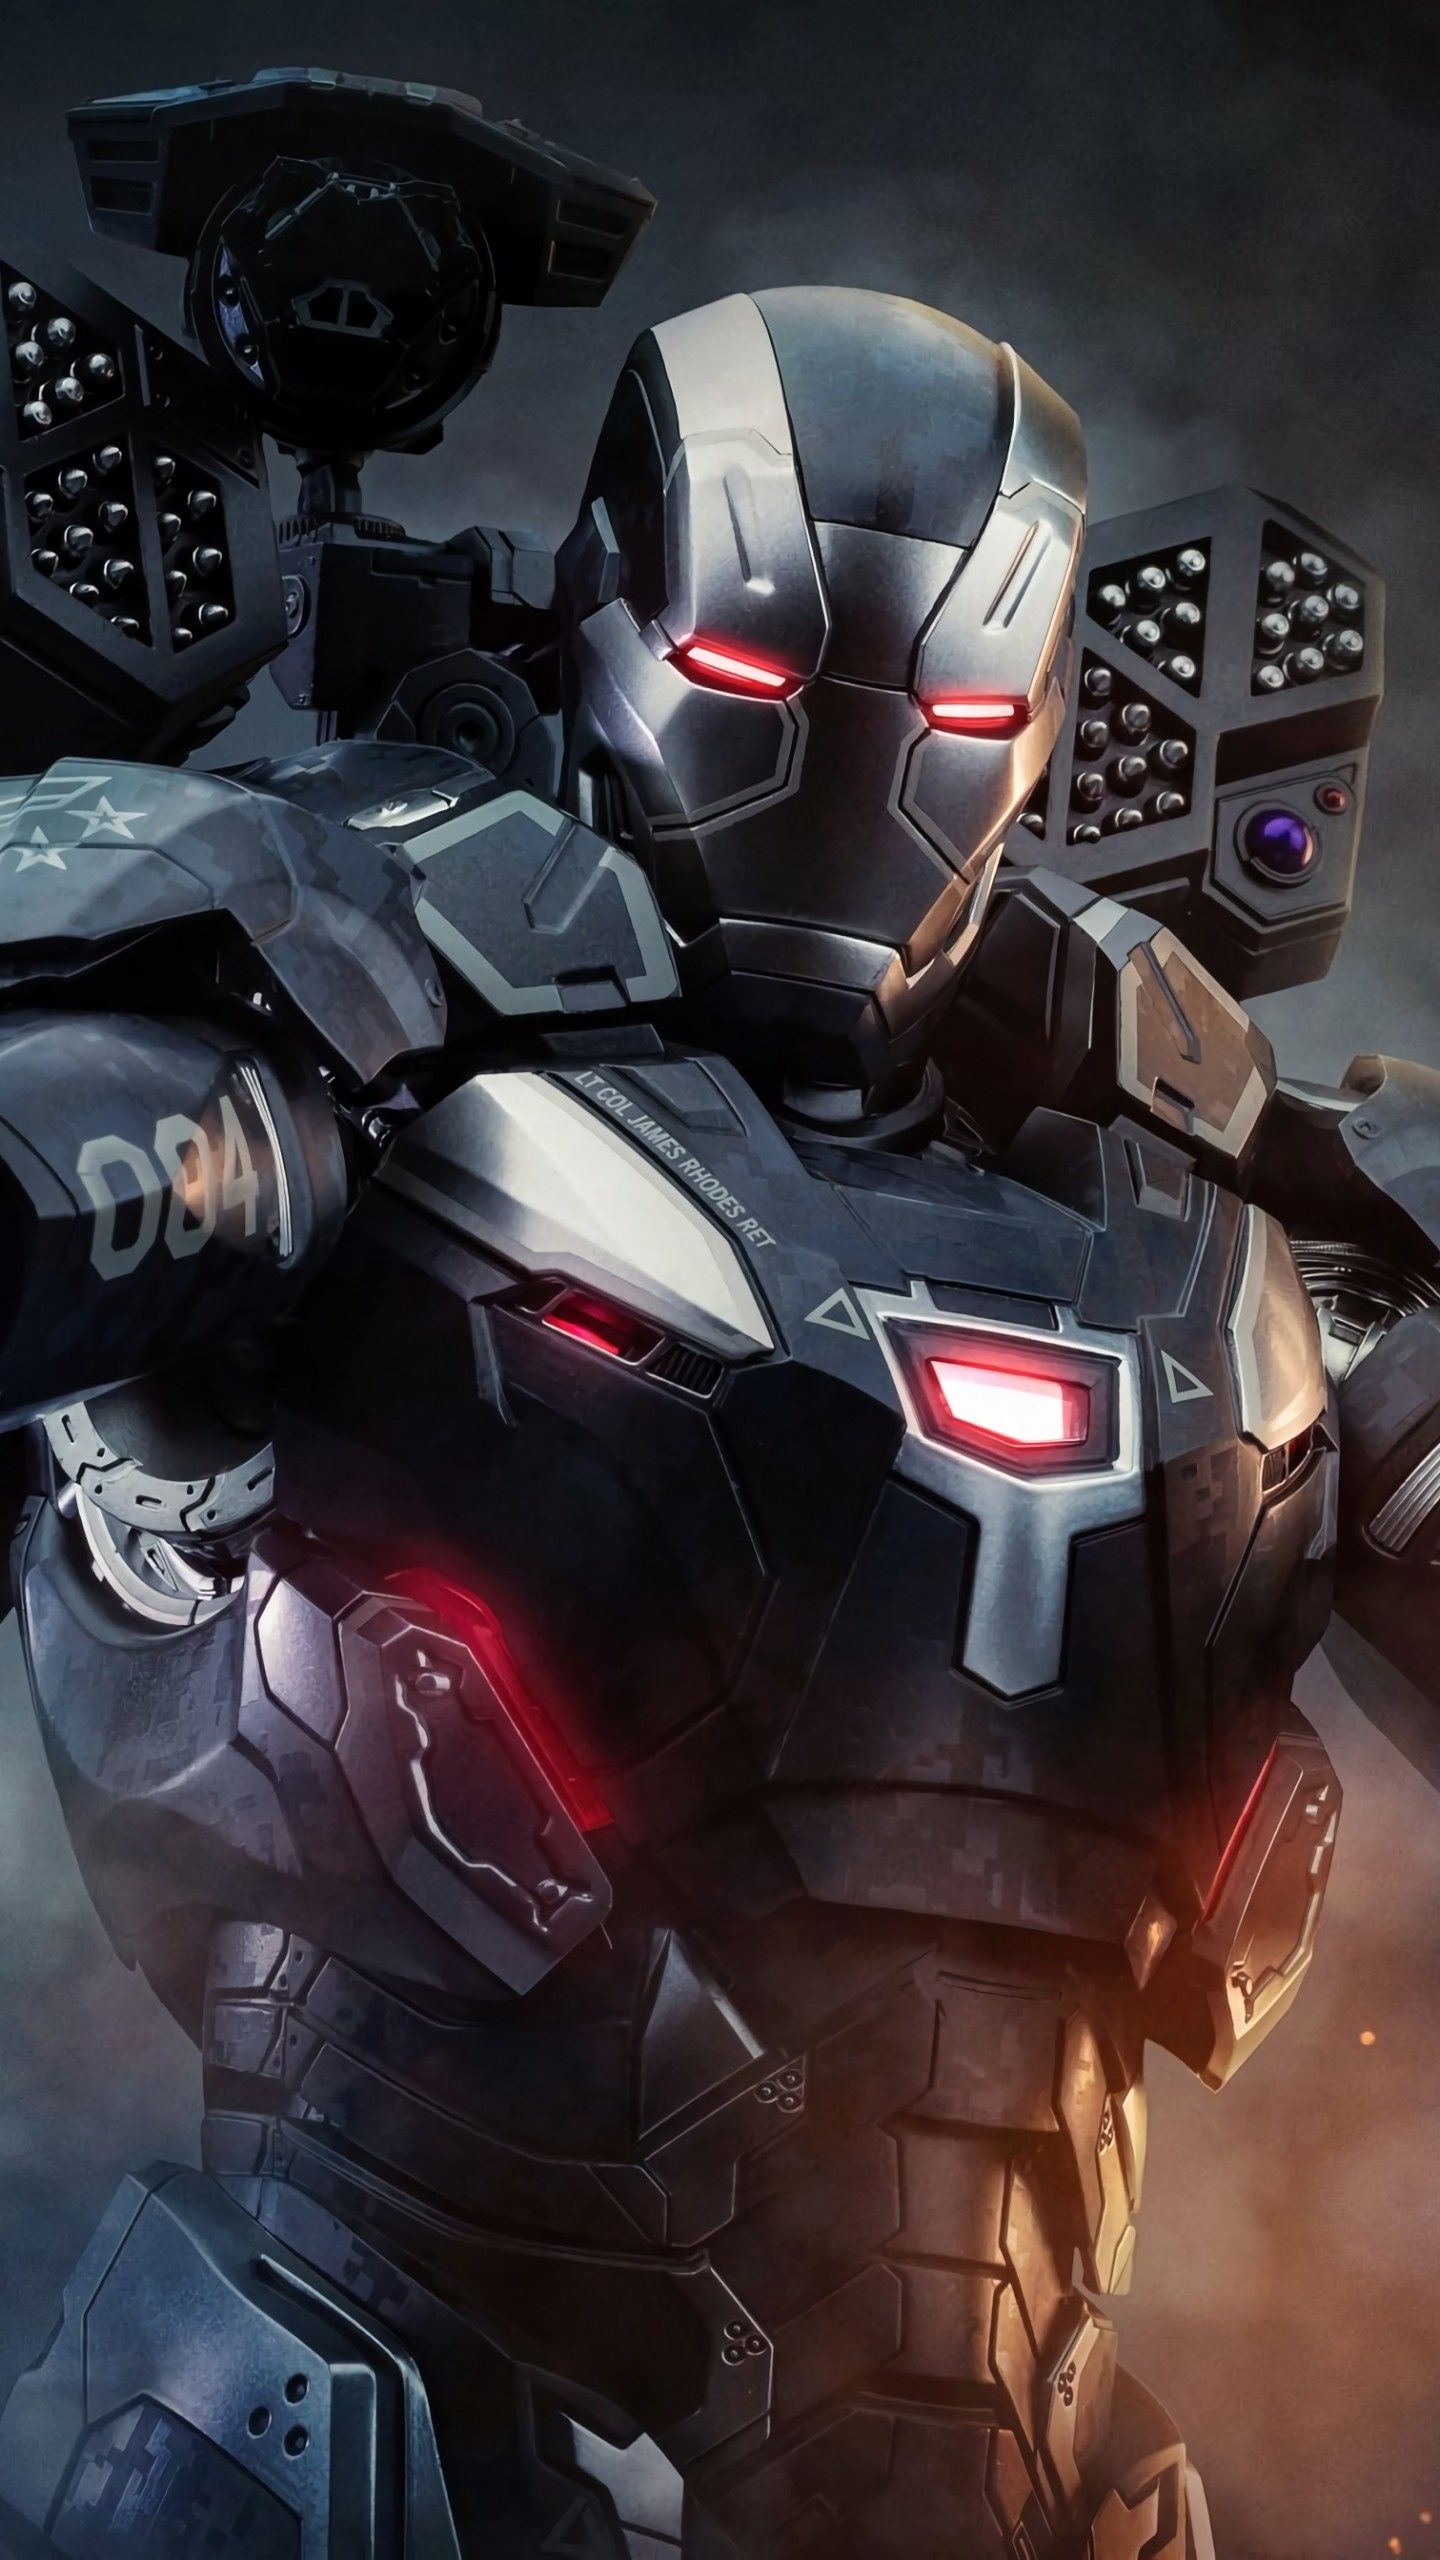 Wallpaper War Machine, 4K, Creative Graphics,. Wallpaper for iPhone, Android, Mobile and Desktop